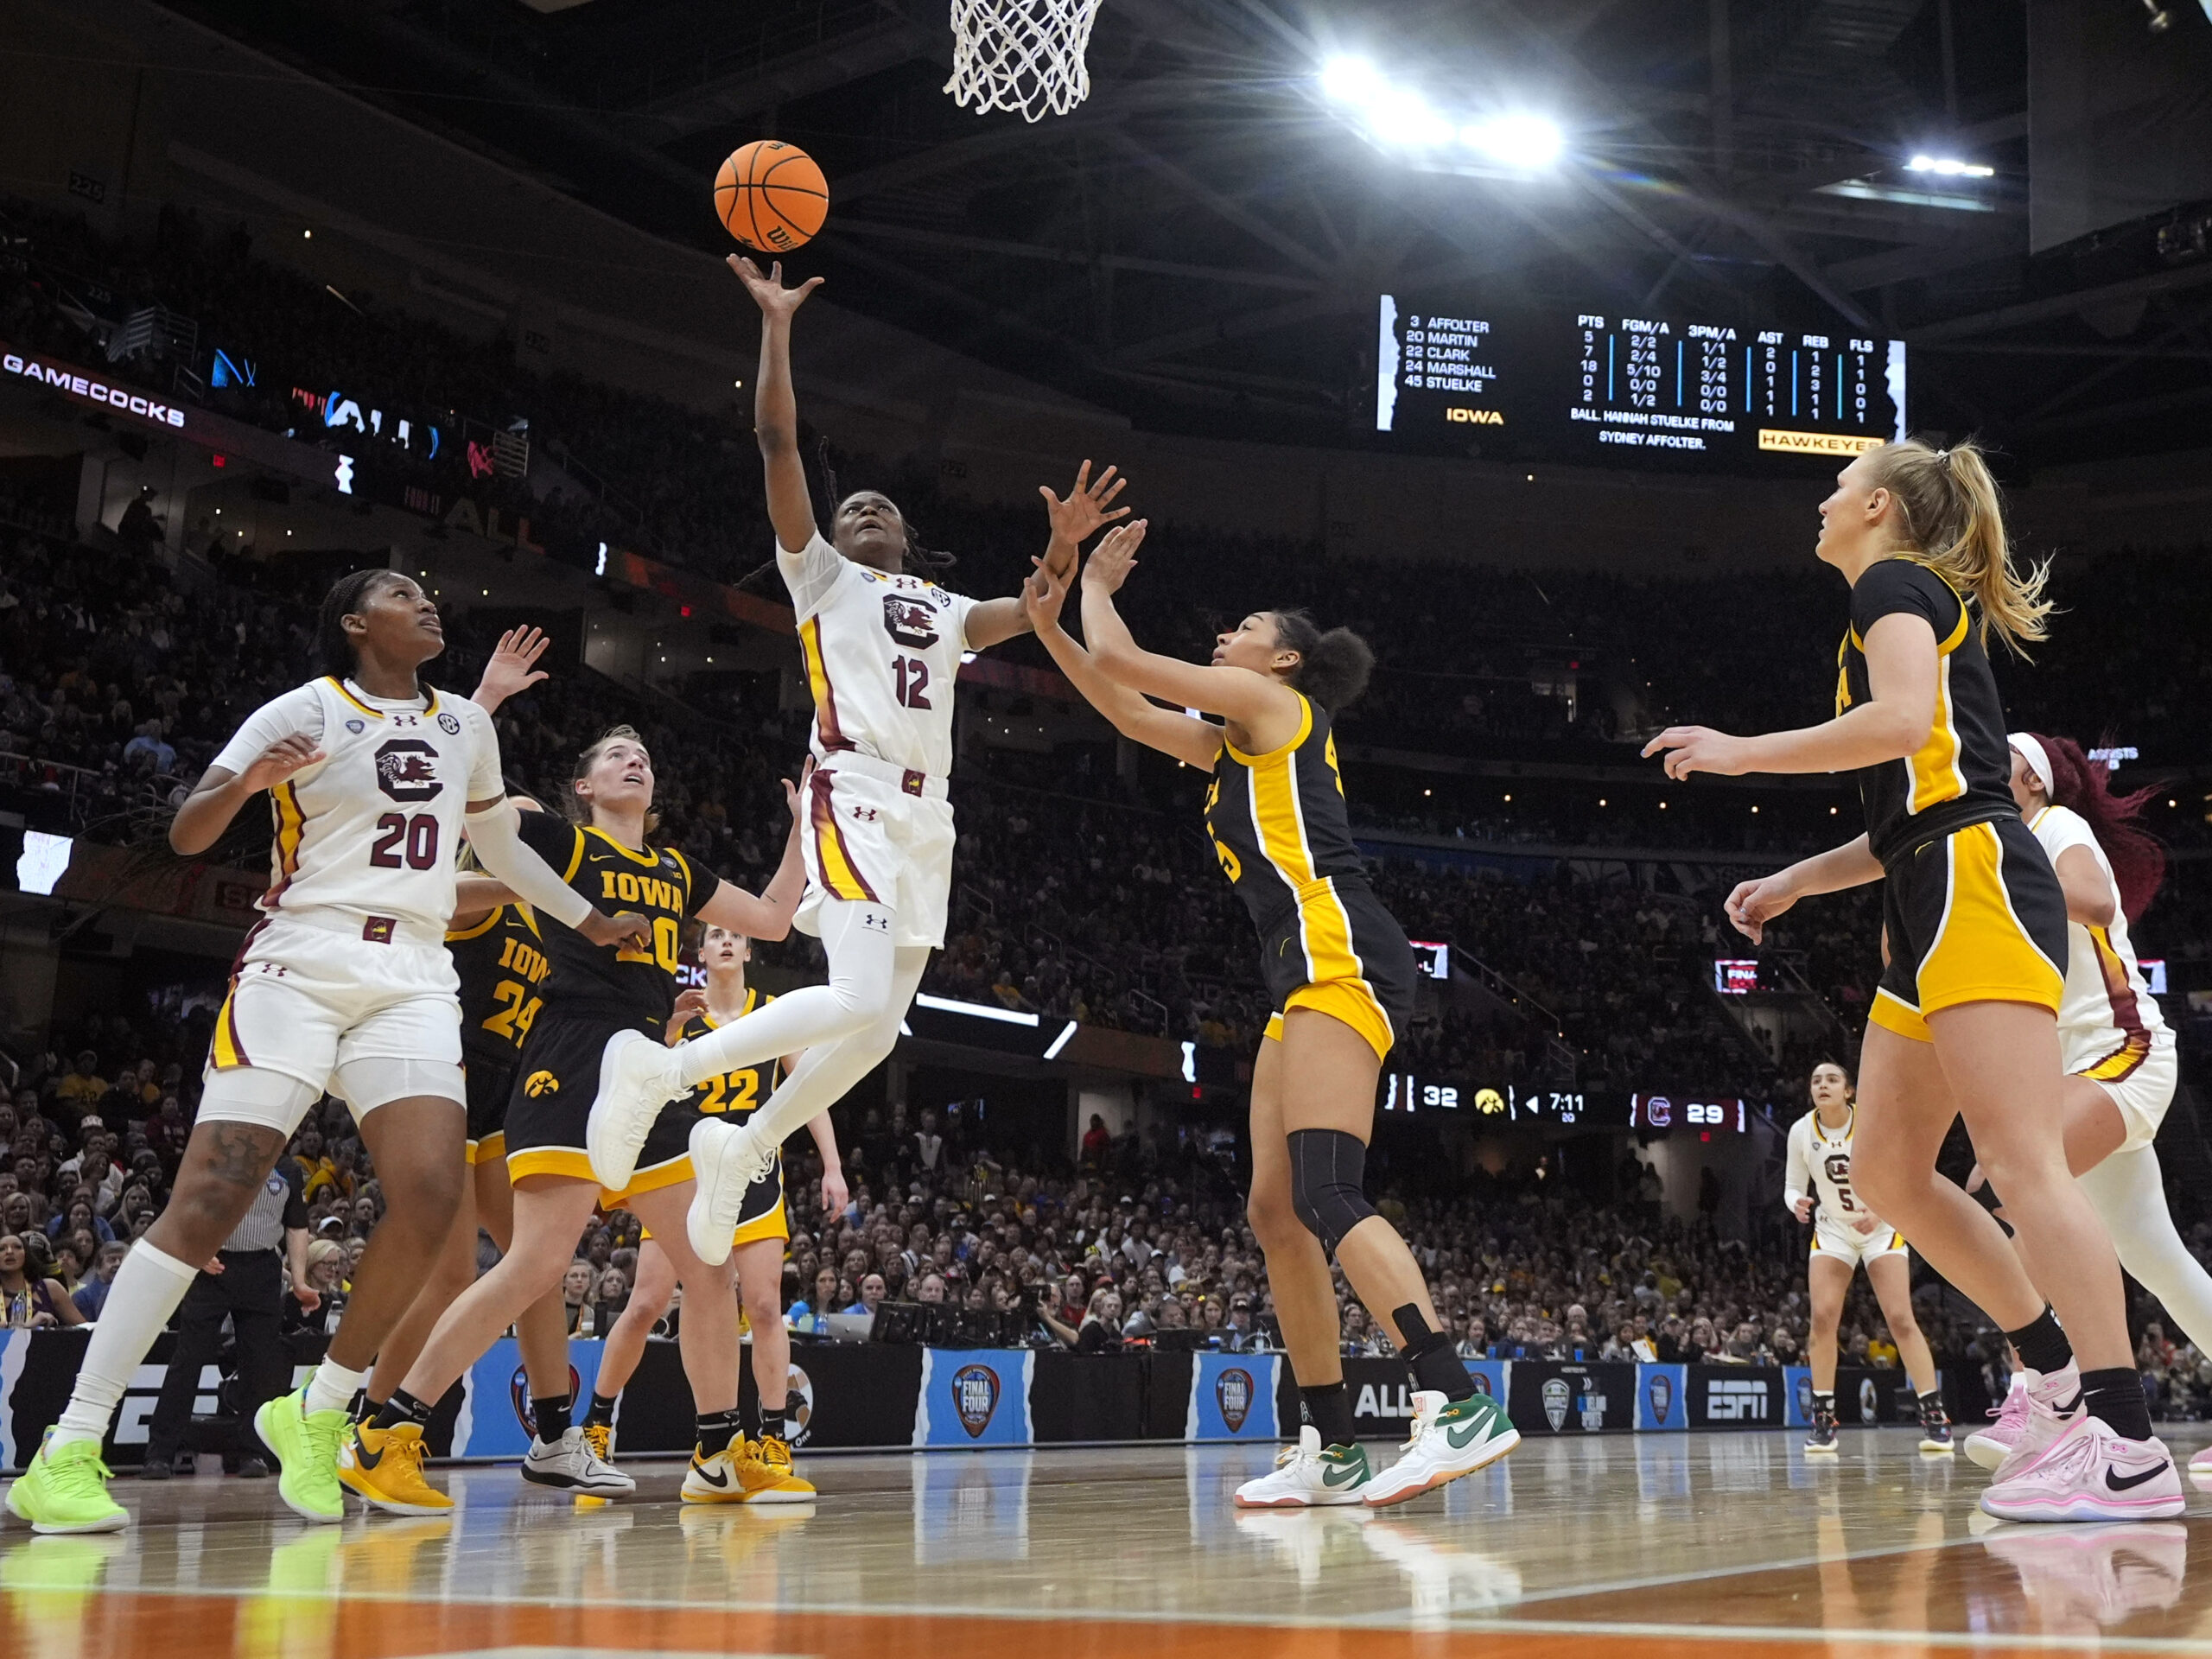 Women’s NCAA championship TV ratings crush the men’s competition